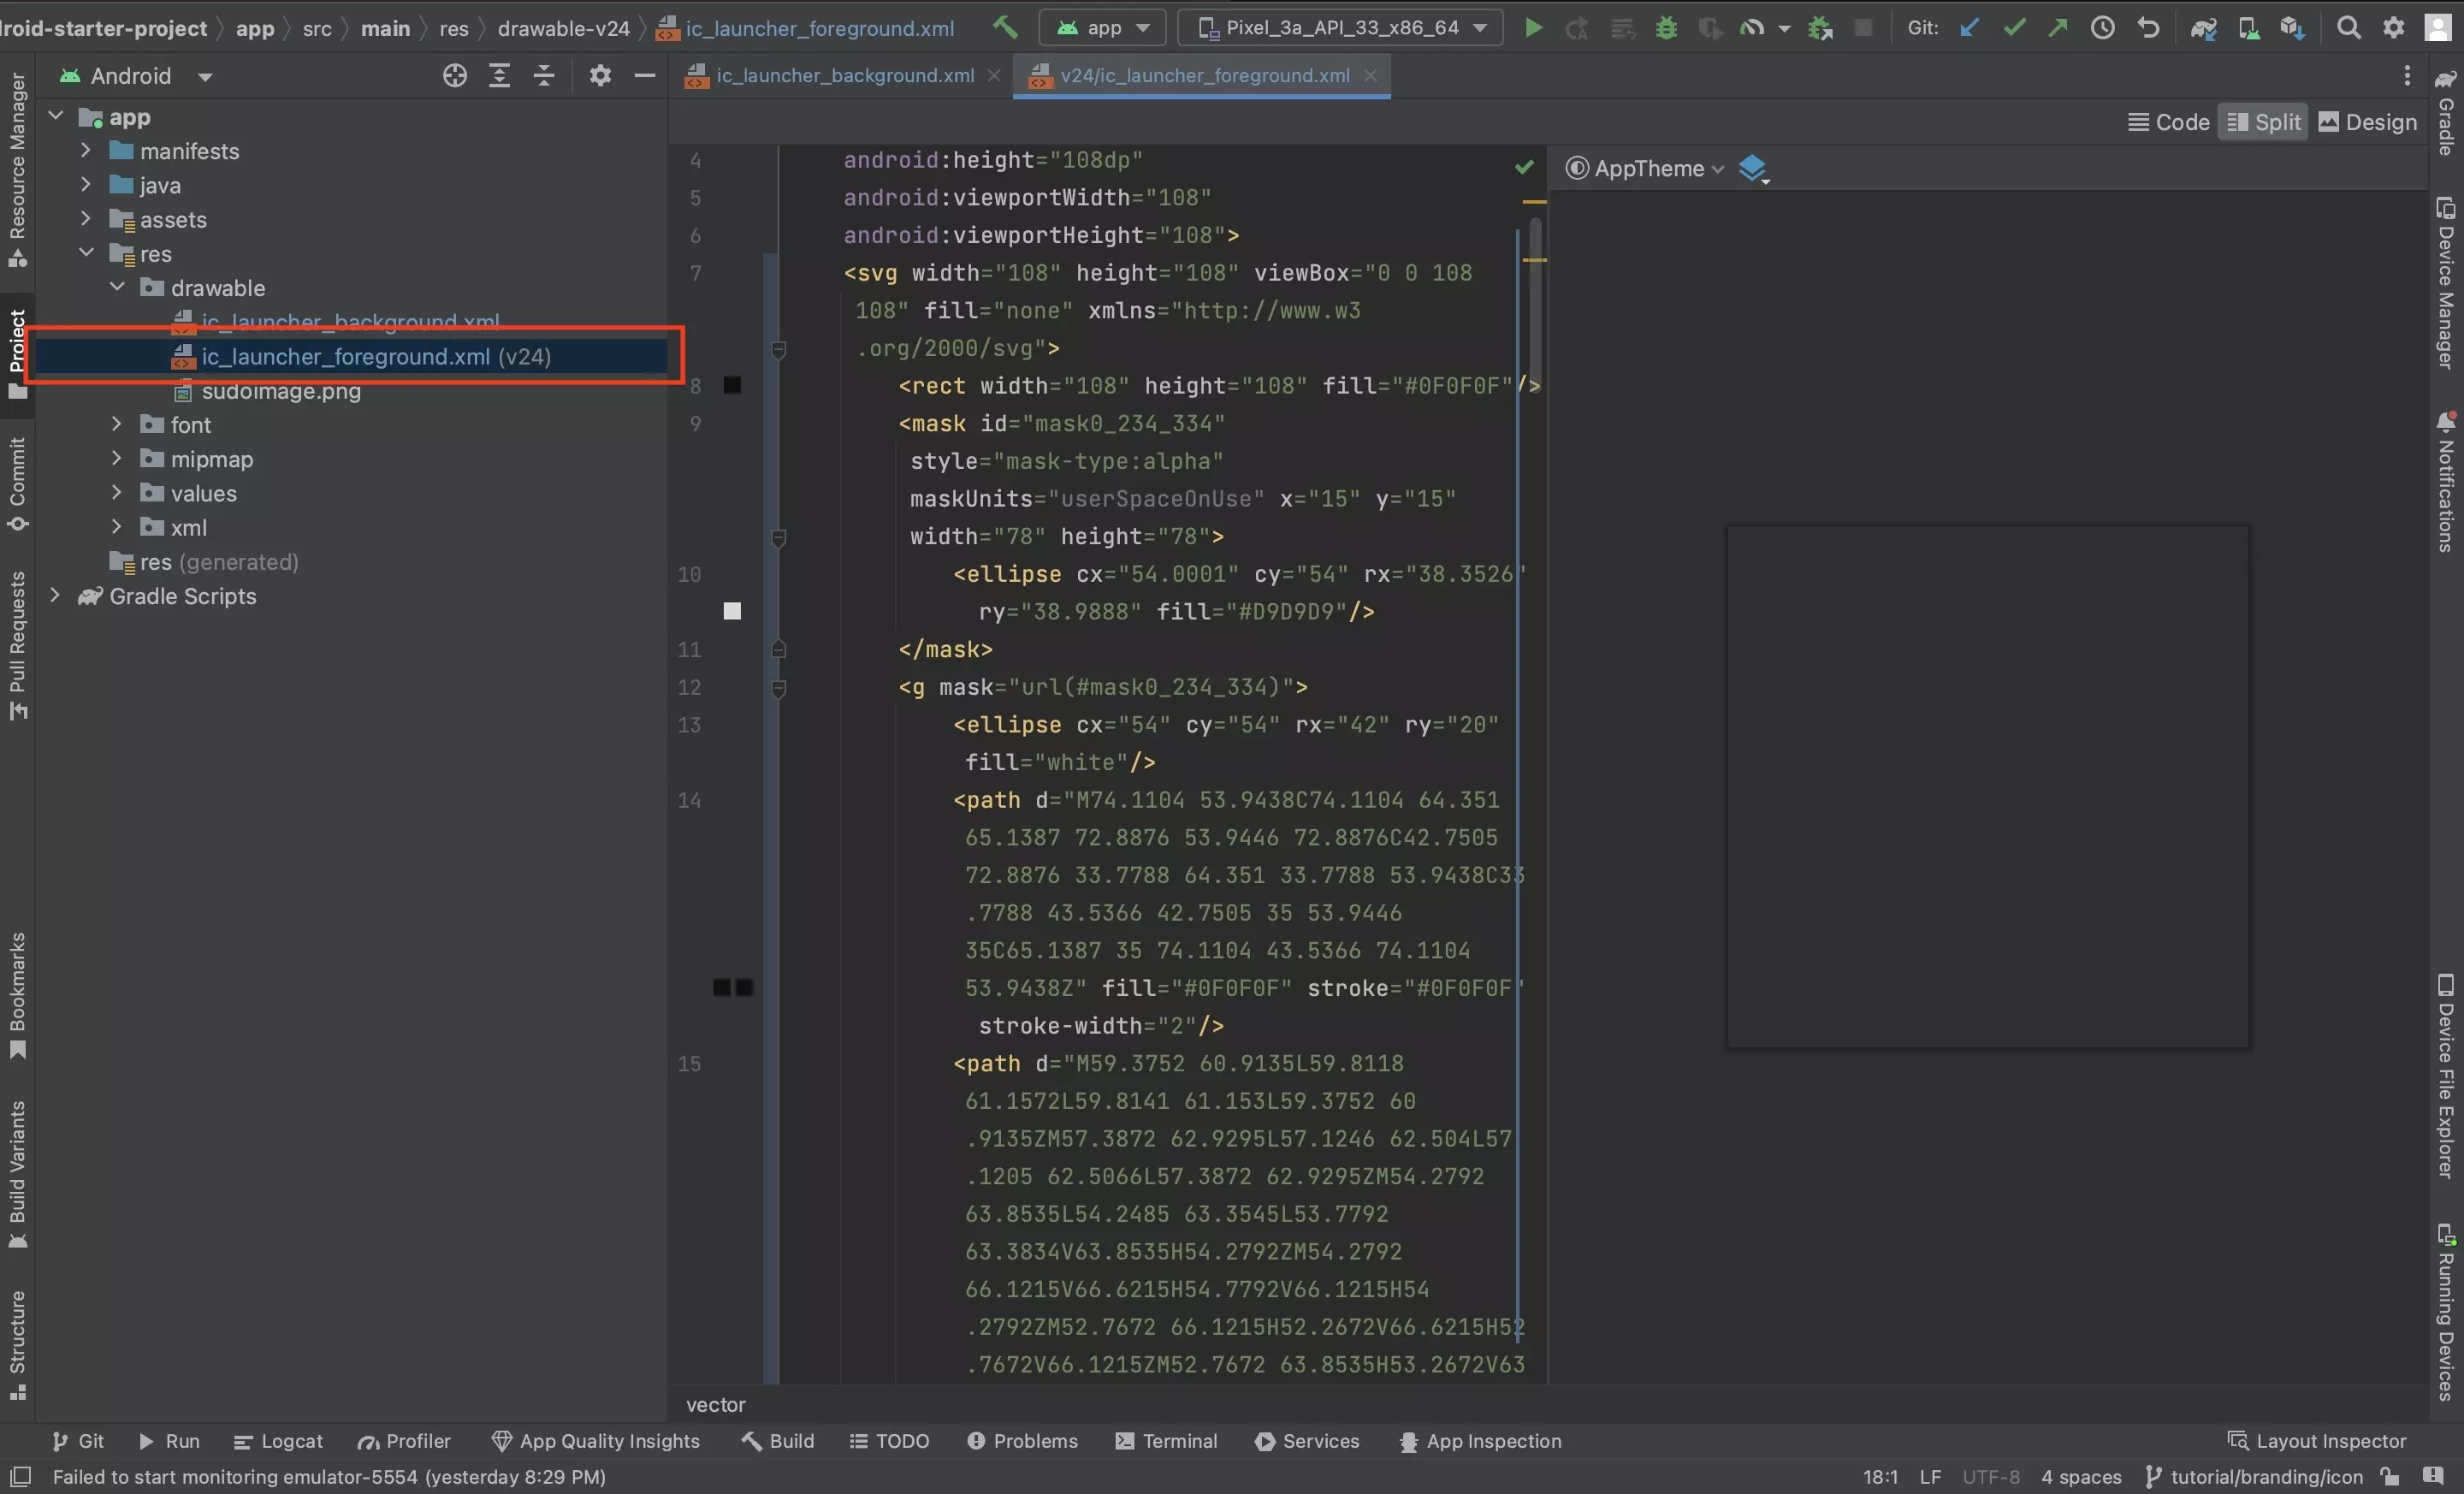 A screenshot of Android Studio showing ic_launcher_foreground.xml file. It shows the code that was pasted from Figma.